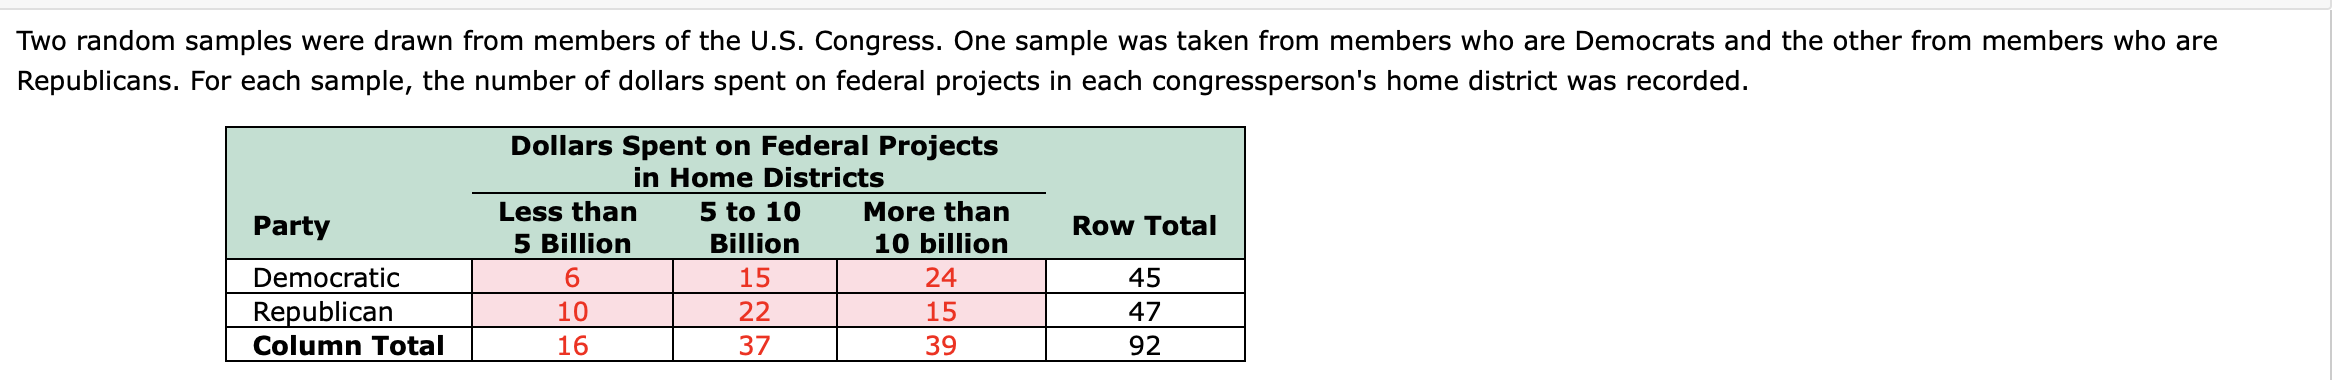 Two random samples were drawn from members of the U.S. Congress. One sample was taken from members who are Democrats and the other from members who are
Republicans. For each sample, the number of dollars spent on federal projects in each congressperson's home district was recorded.
Dollars Spent on Federal Projects
in Home Districts
Less than
5 to 10
More than
Party
Row Total
5 Billion
Billion
10 billion
Democratic
6.
15
24
45
Republican
Column Total
10
22
15
47
16
37
39
92
